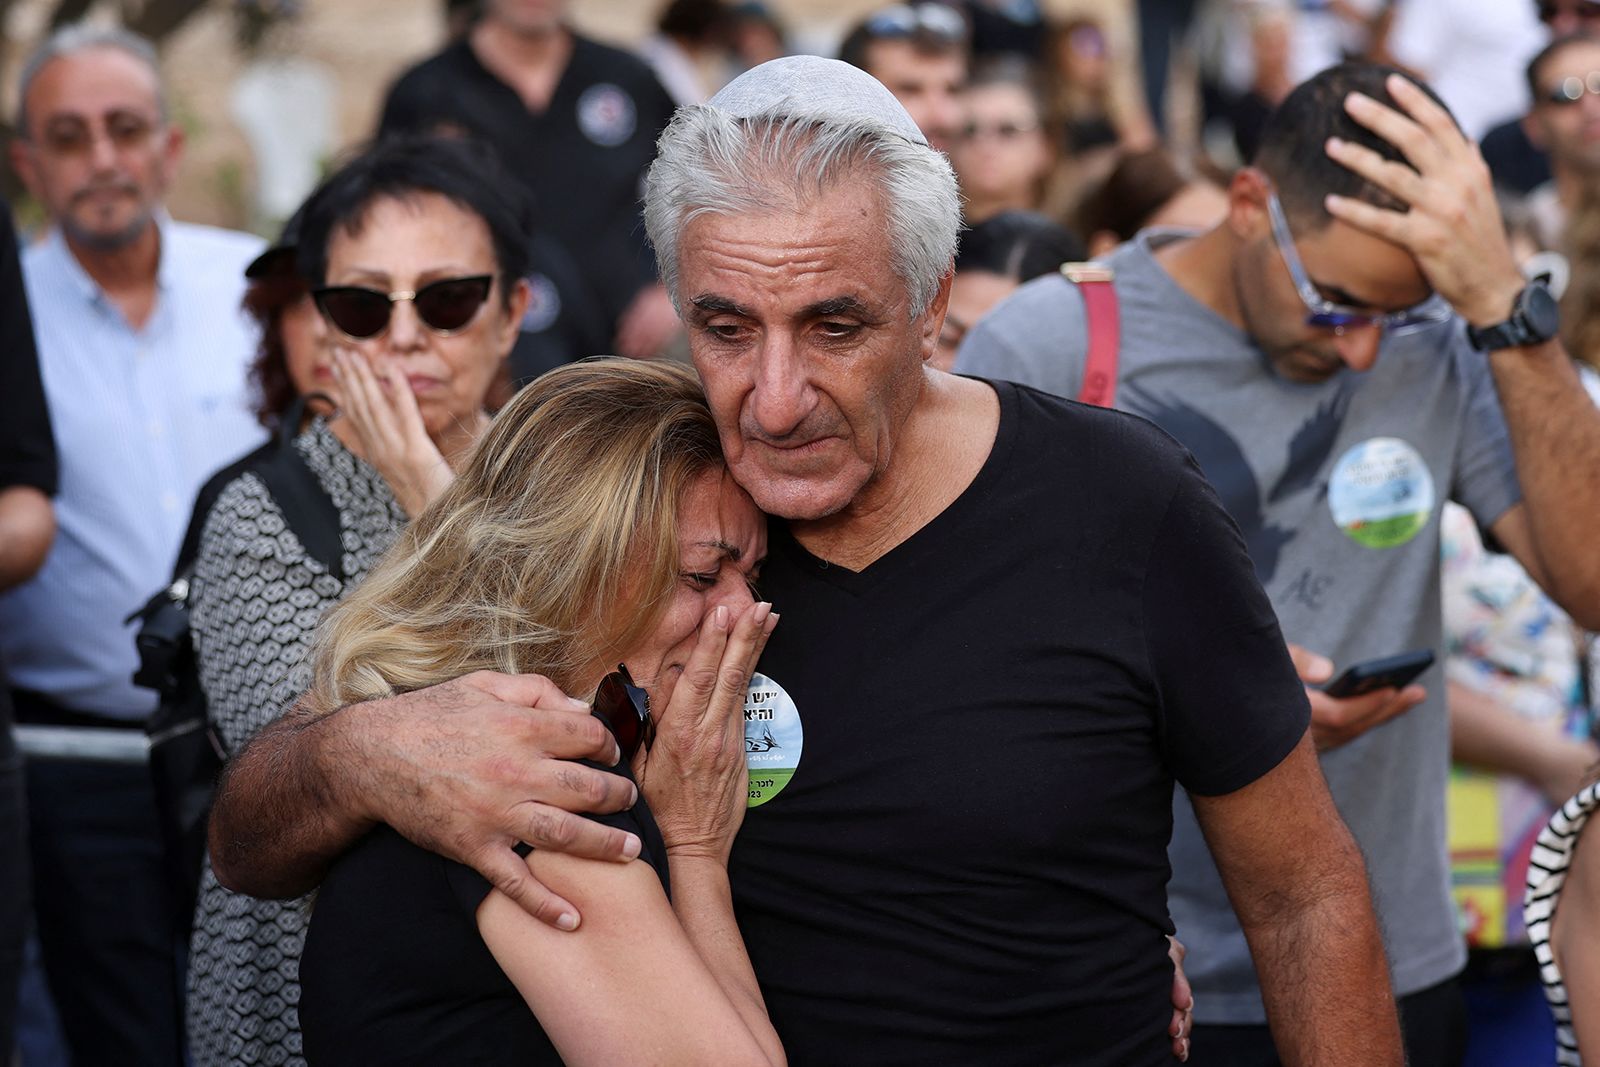 Friends and family mourn Yosef Vahav, 65, who was killed following Hamas' infiltration from Gaza, at his funeral in Beit Guvrin, Israel on Tuesday, October 31.